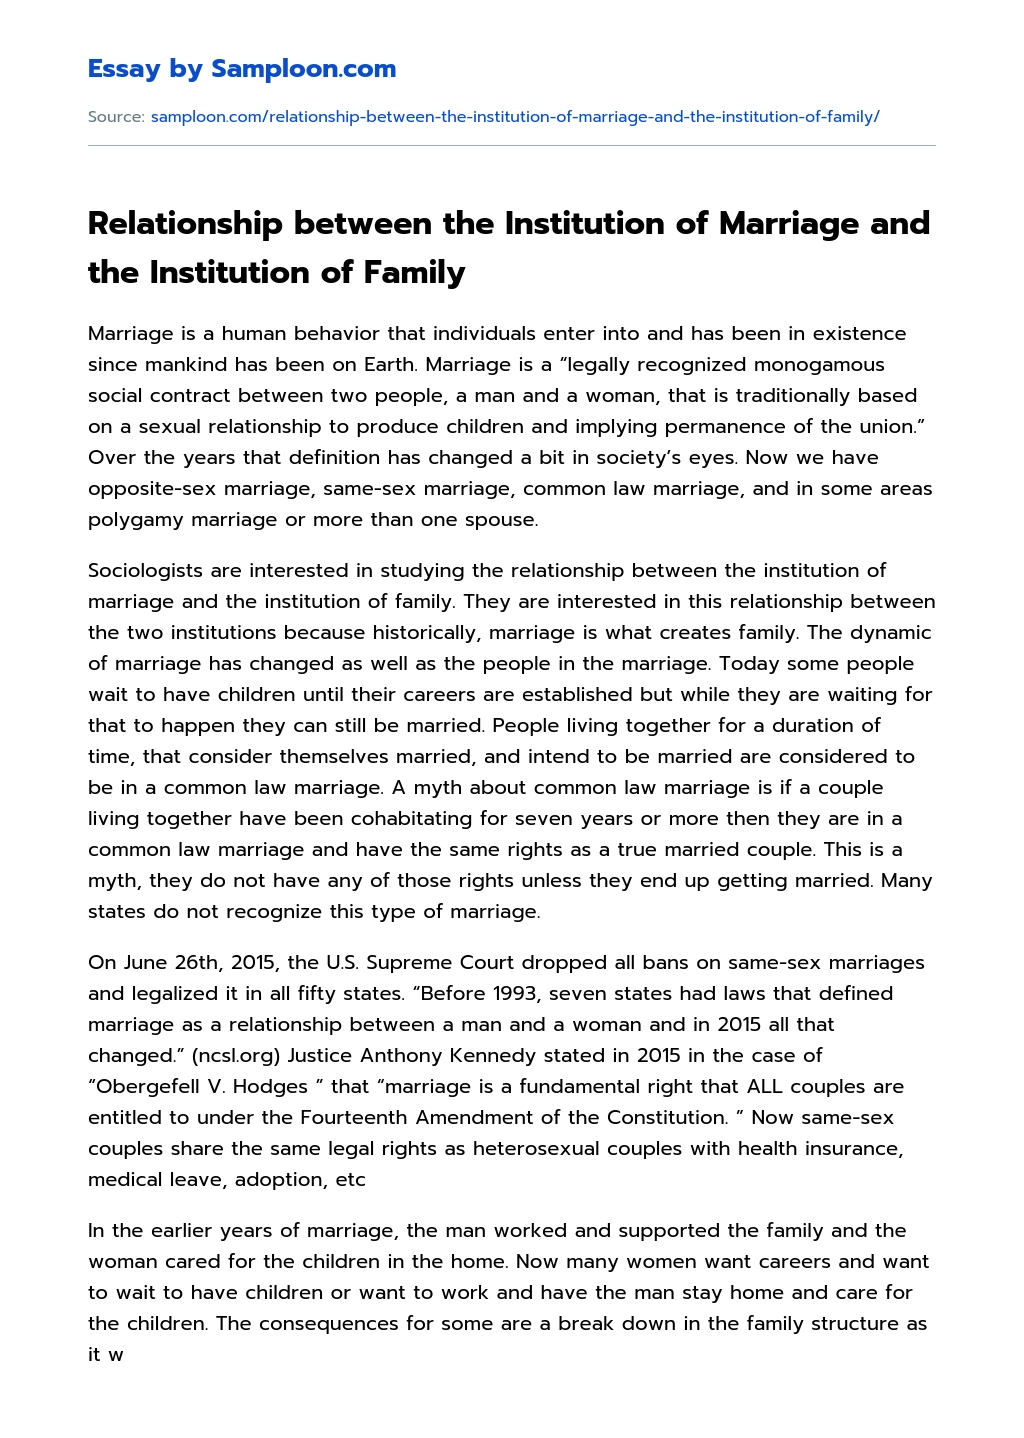 Relationship between the Institution of Marriage and the Institution of Family essay